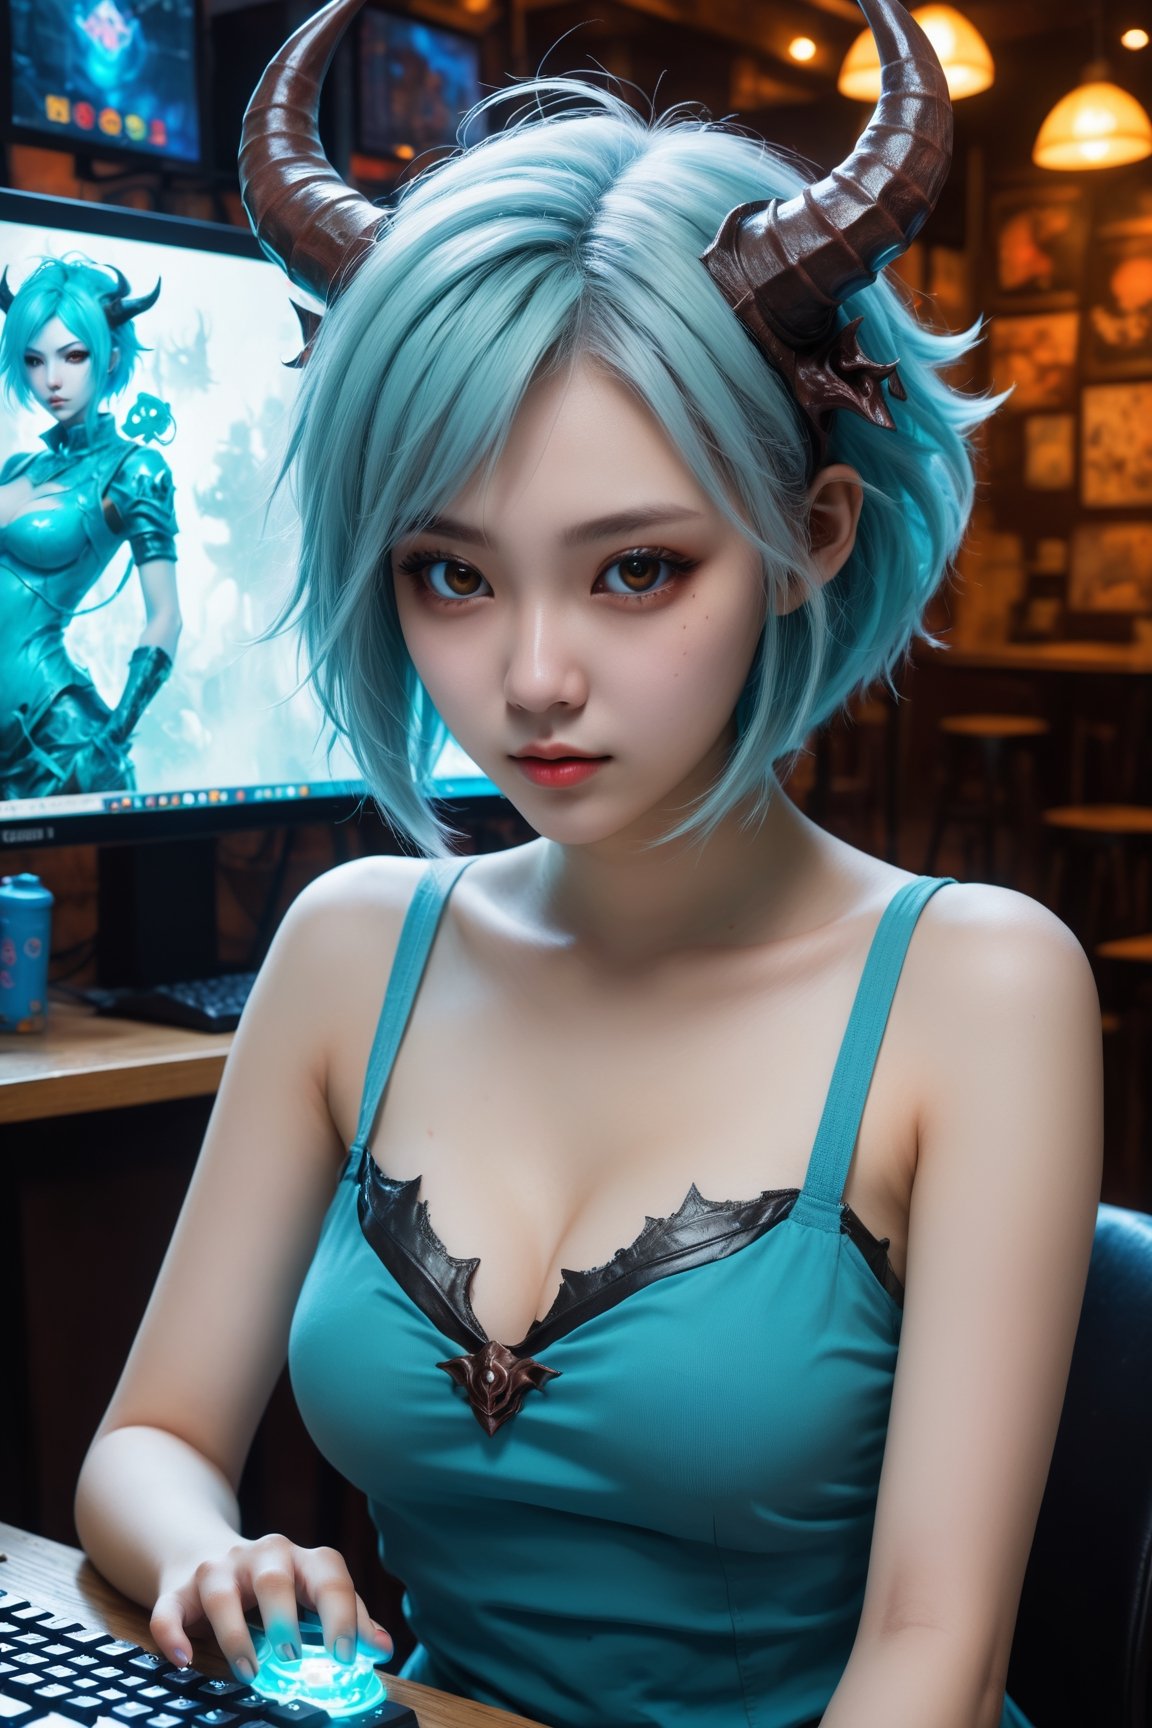 HONG KONG Girl ((September Ai)) with brown colour skin, AQUA short messy hair, 

a girl, demon, demongirl, horns, in Internet cafe, playing game, masterpiece, Smokey eyes make up, pale skin, oil paint style,huoshen
